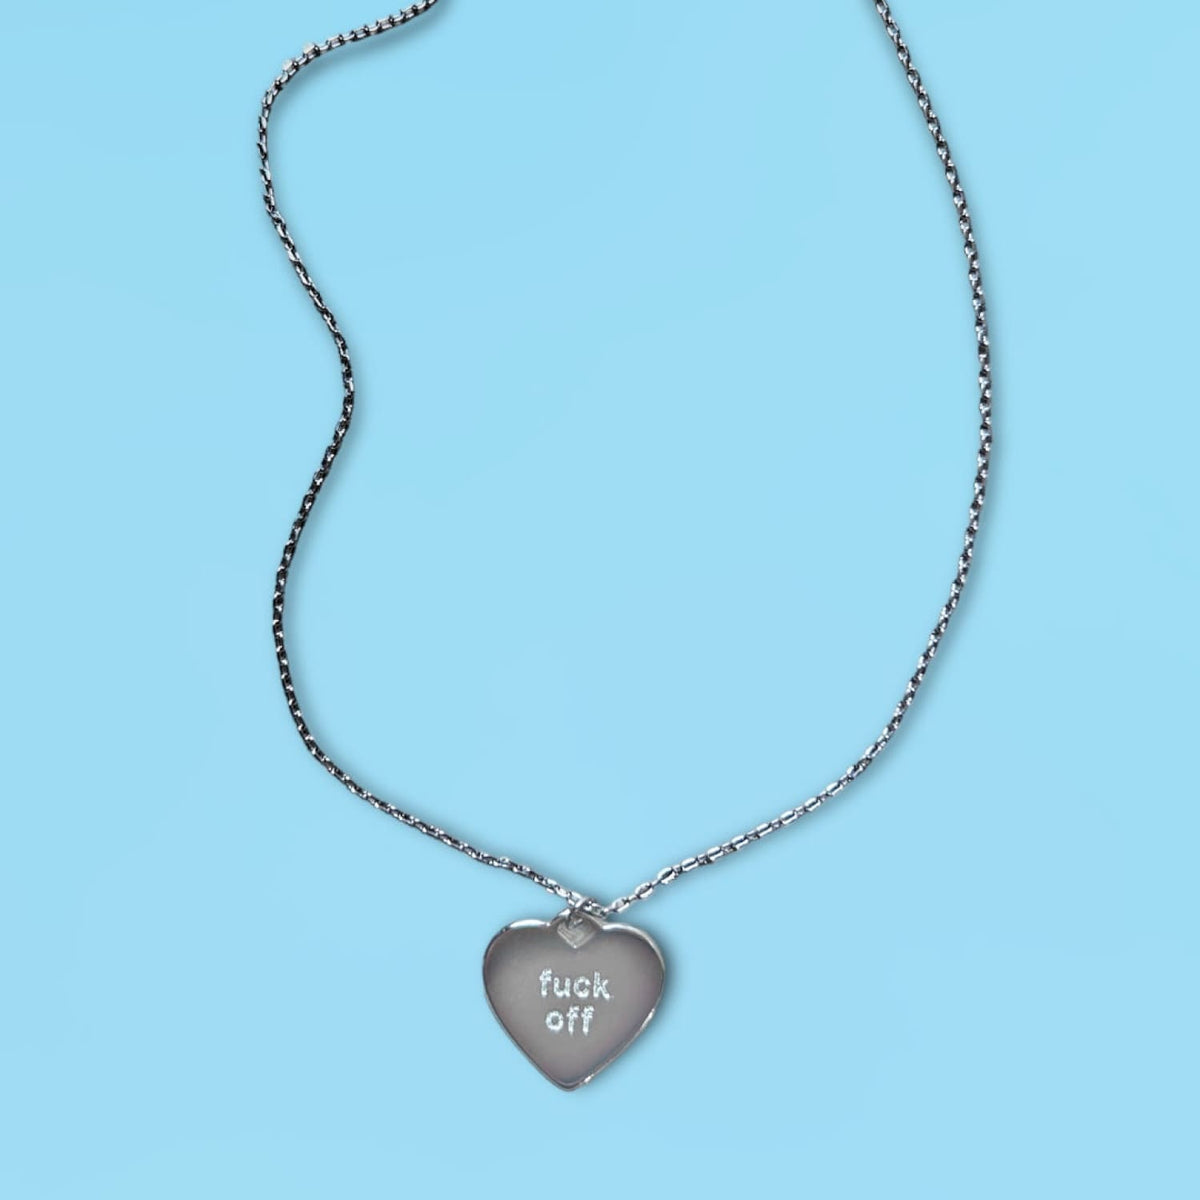 Fuck Off Heart Pendant Necklace Anniversary Gifts - Bff -